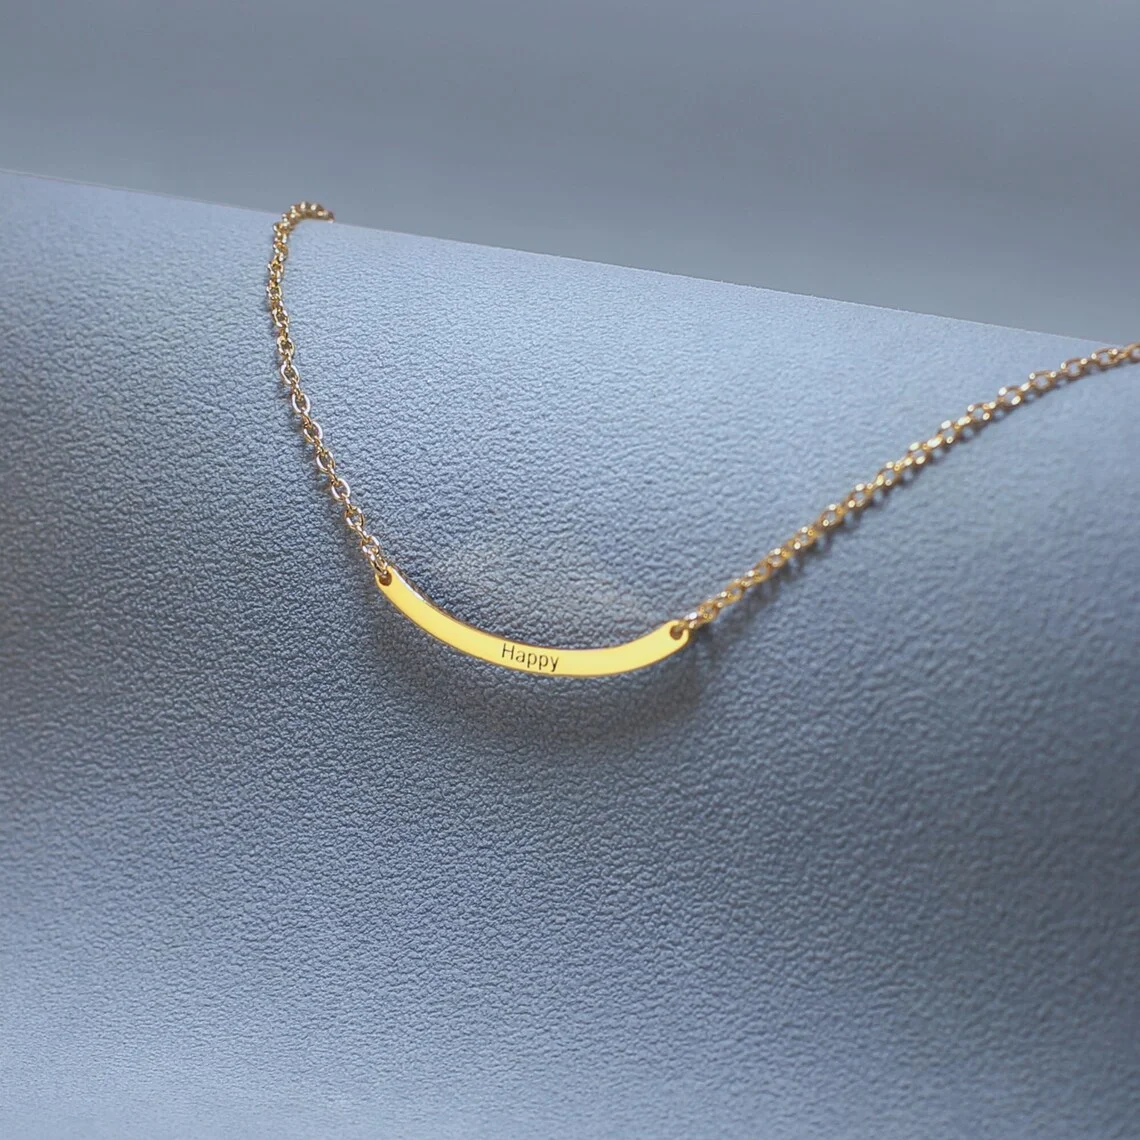 Personalized Curved Bar Necklace Stainless Steel Necklace Customized Jewelry Gift Gold Color Chain Bar Jewelry Pendant for Women new curved fit pants spot layer women s high waist personalized distress jean perfect hip to body y2k ladie s trousers